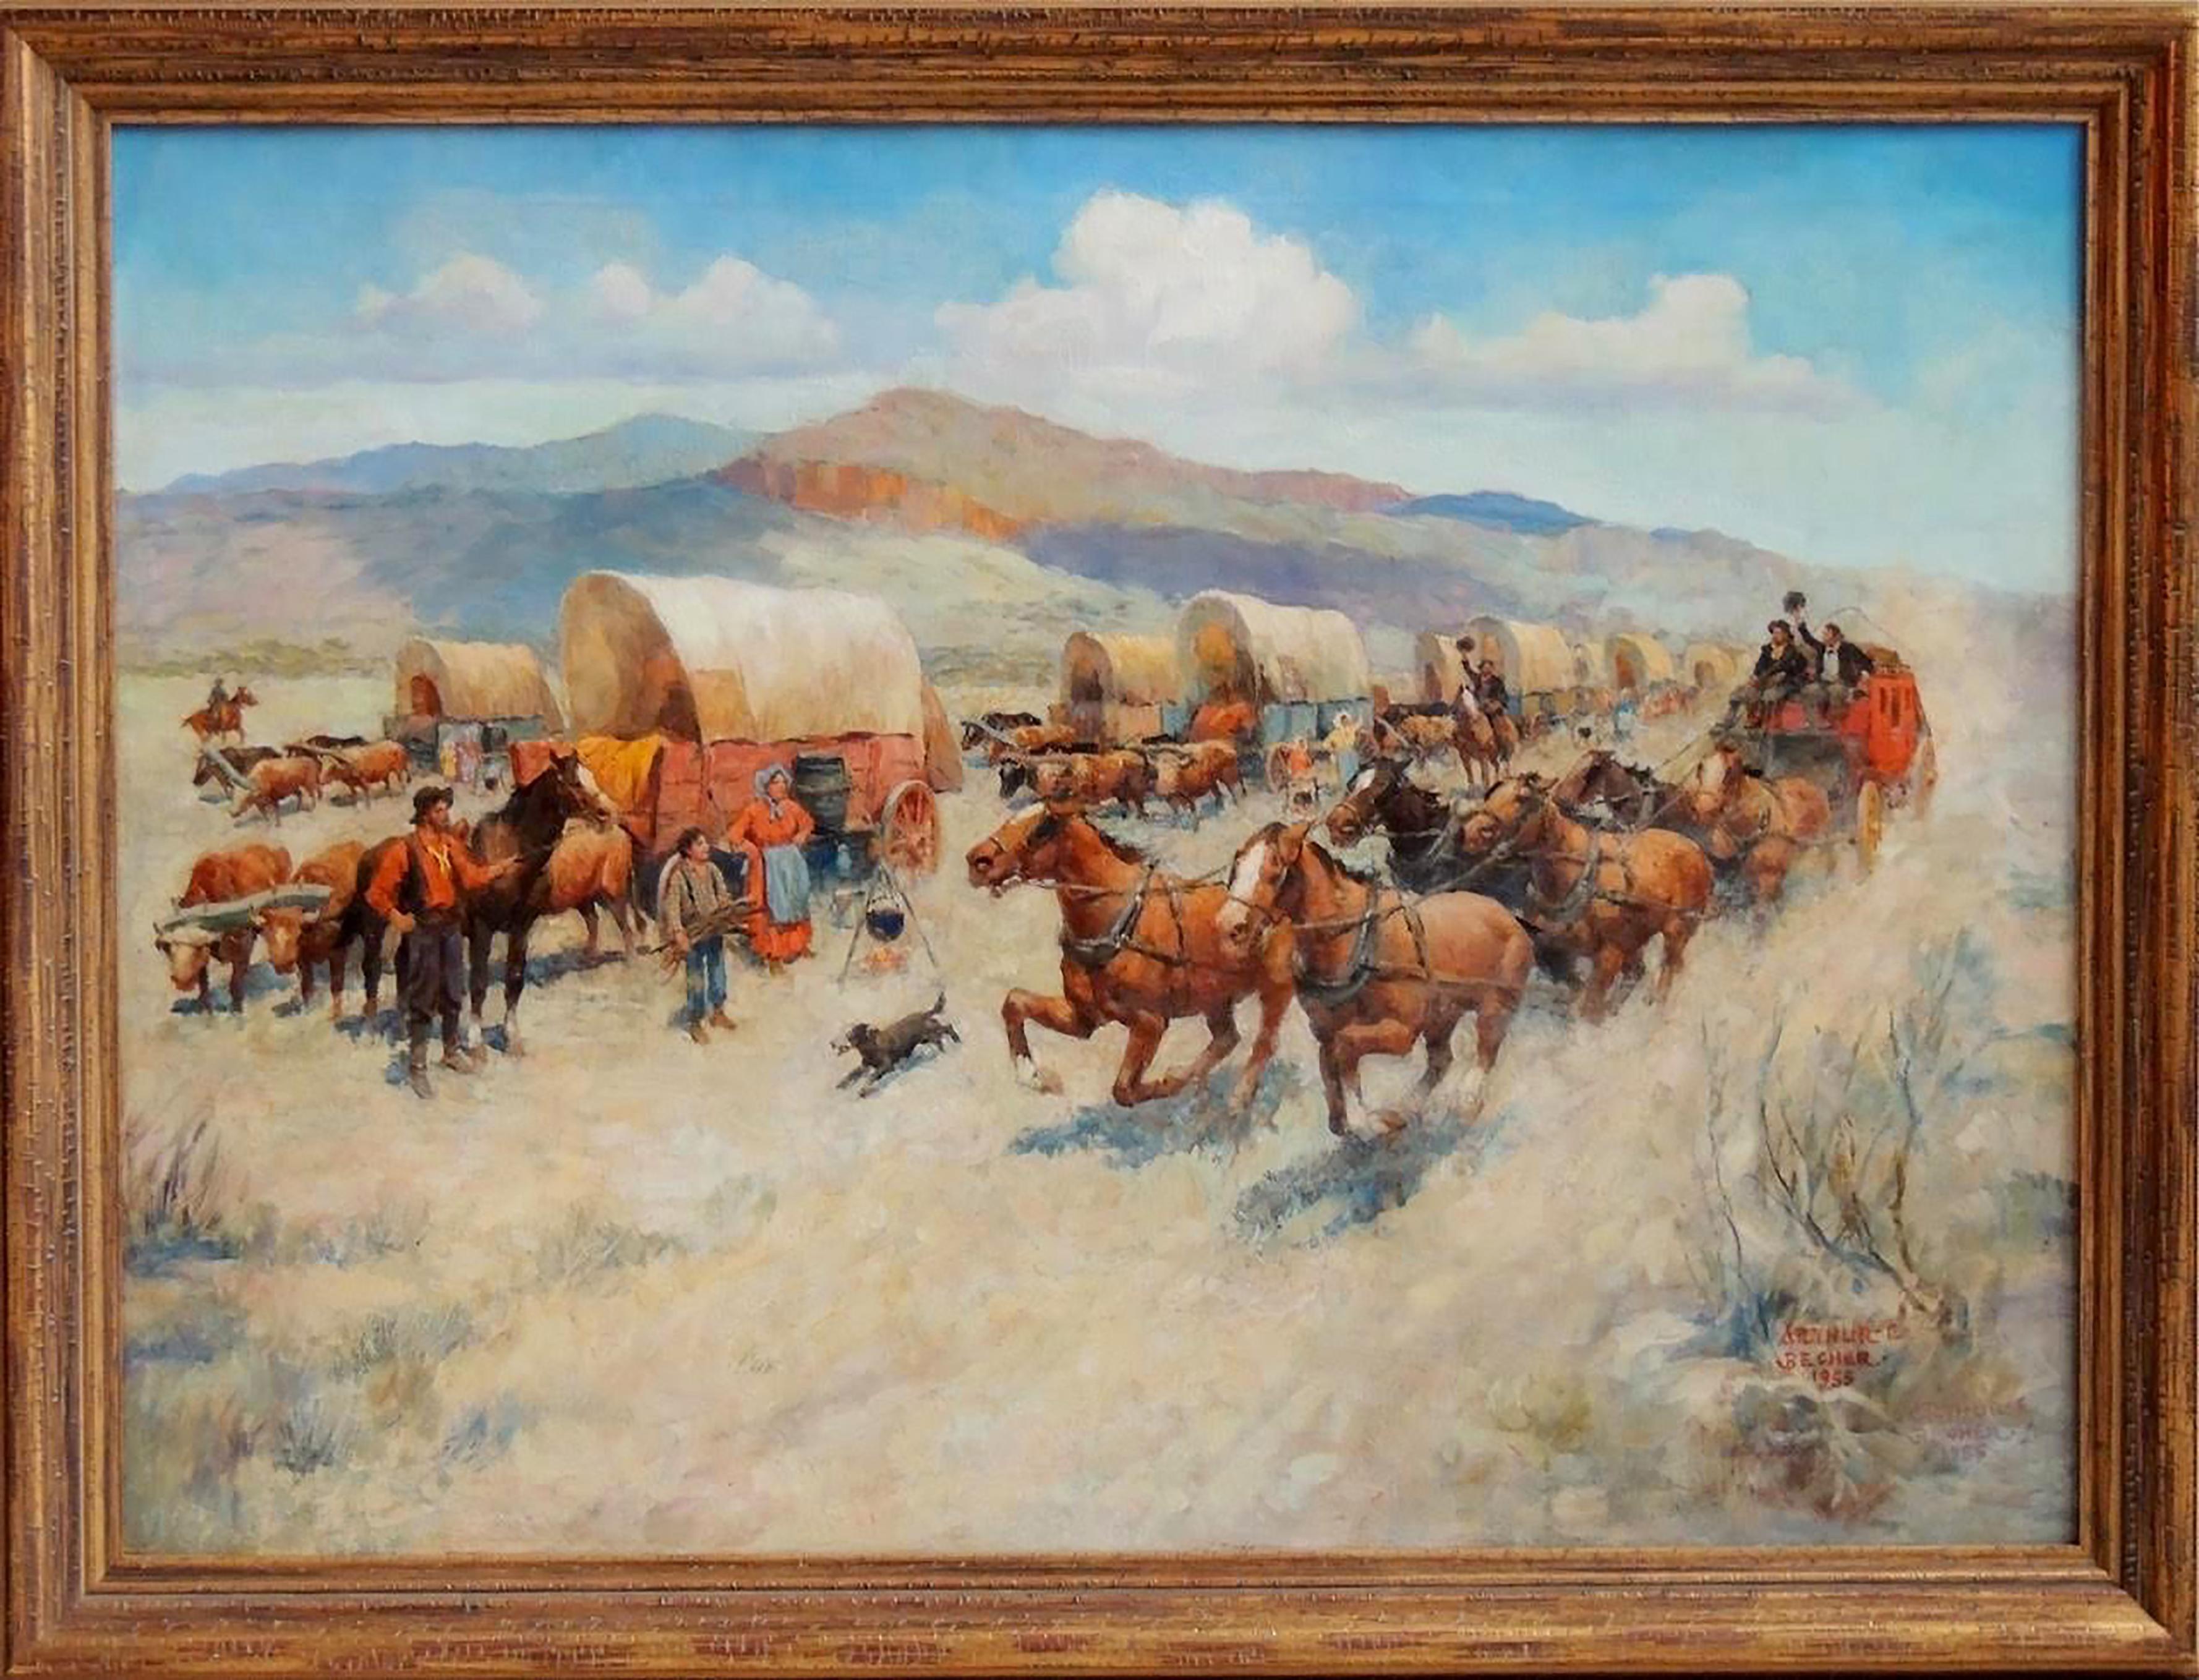 Departing - Painting by Arthur E. Becher